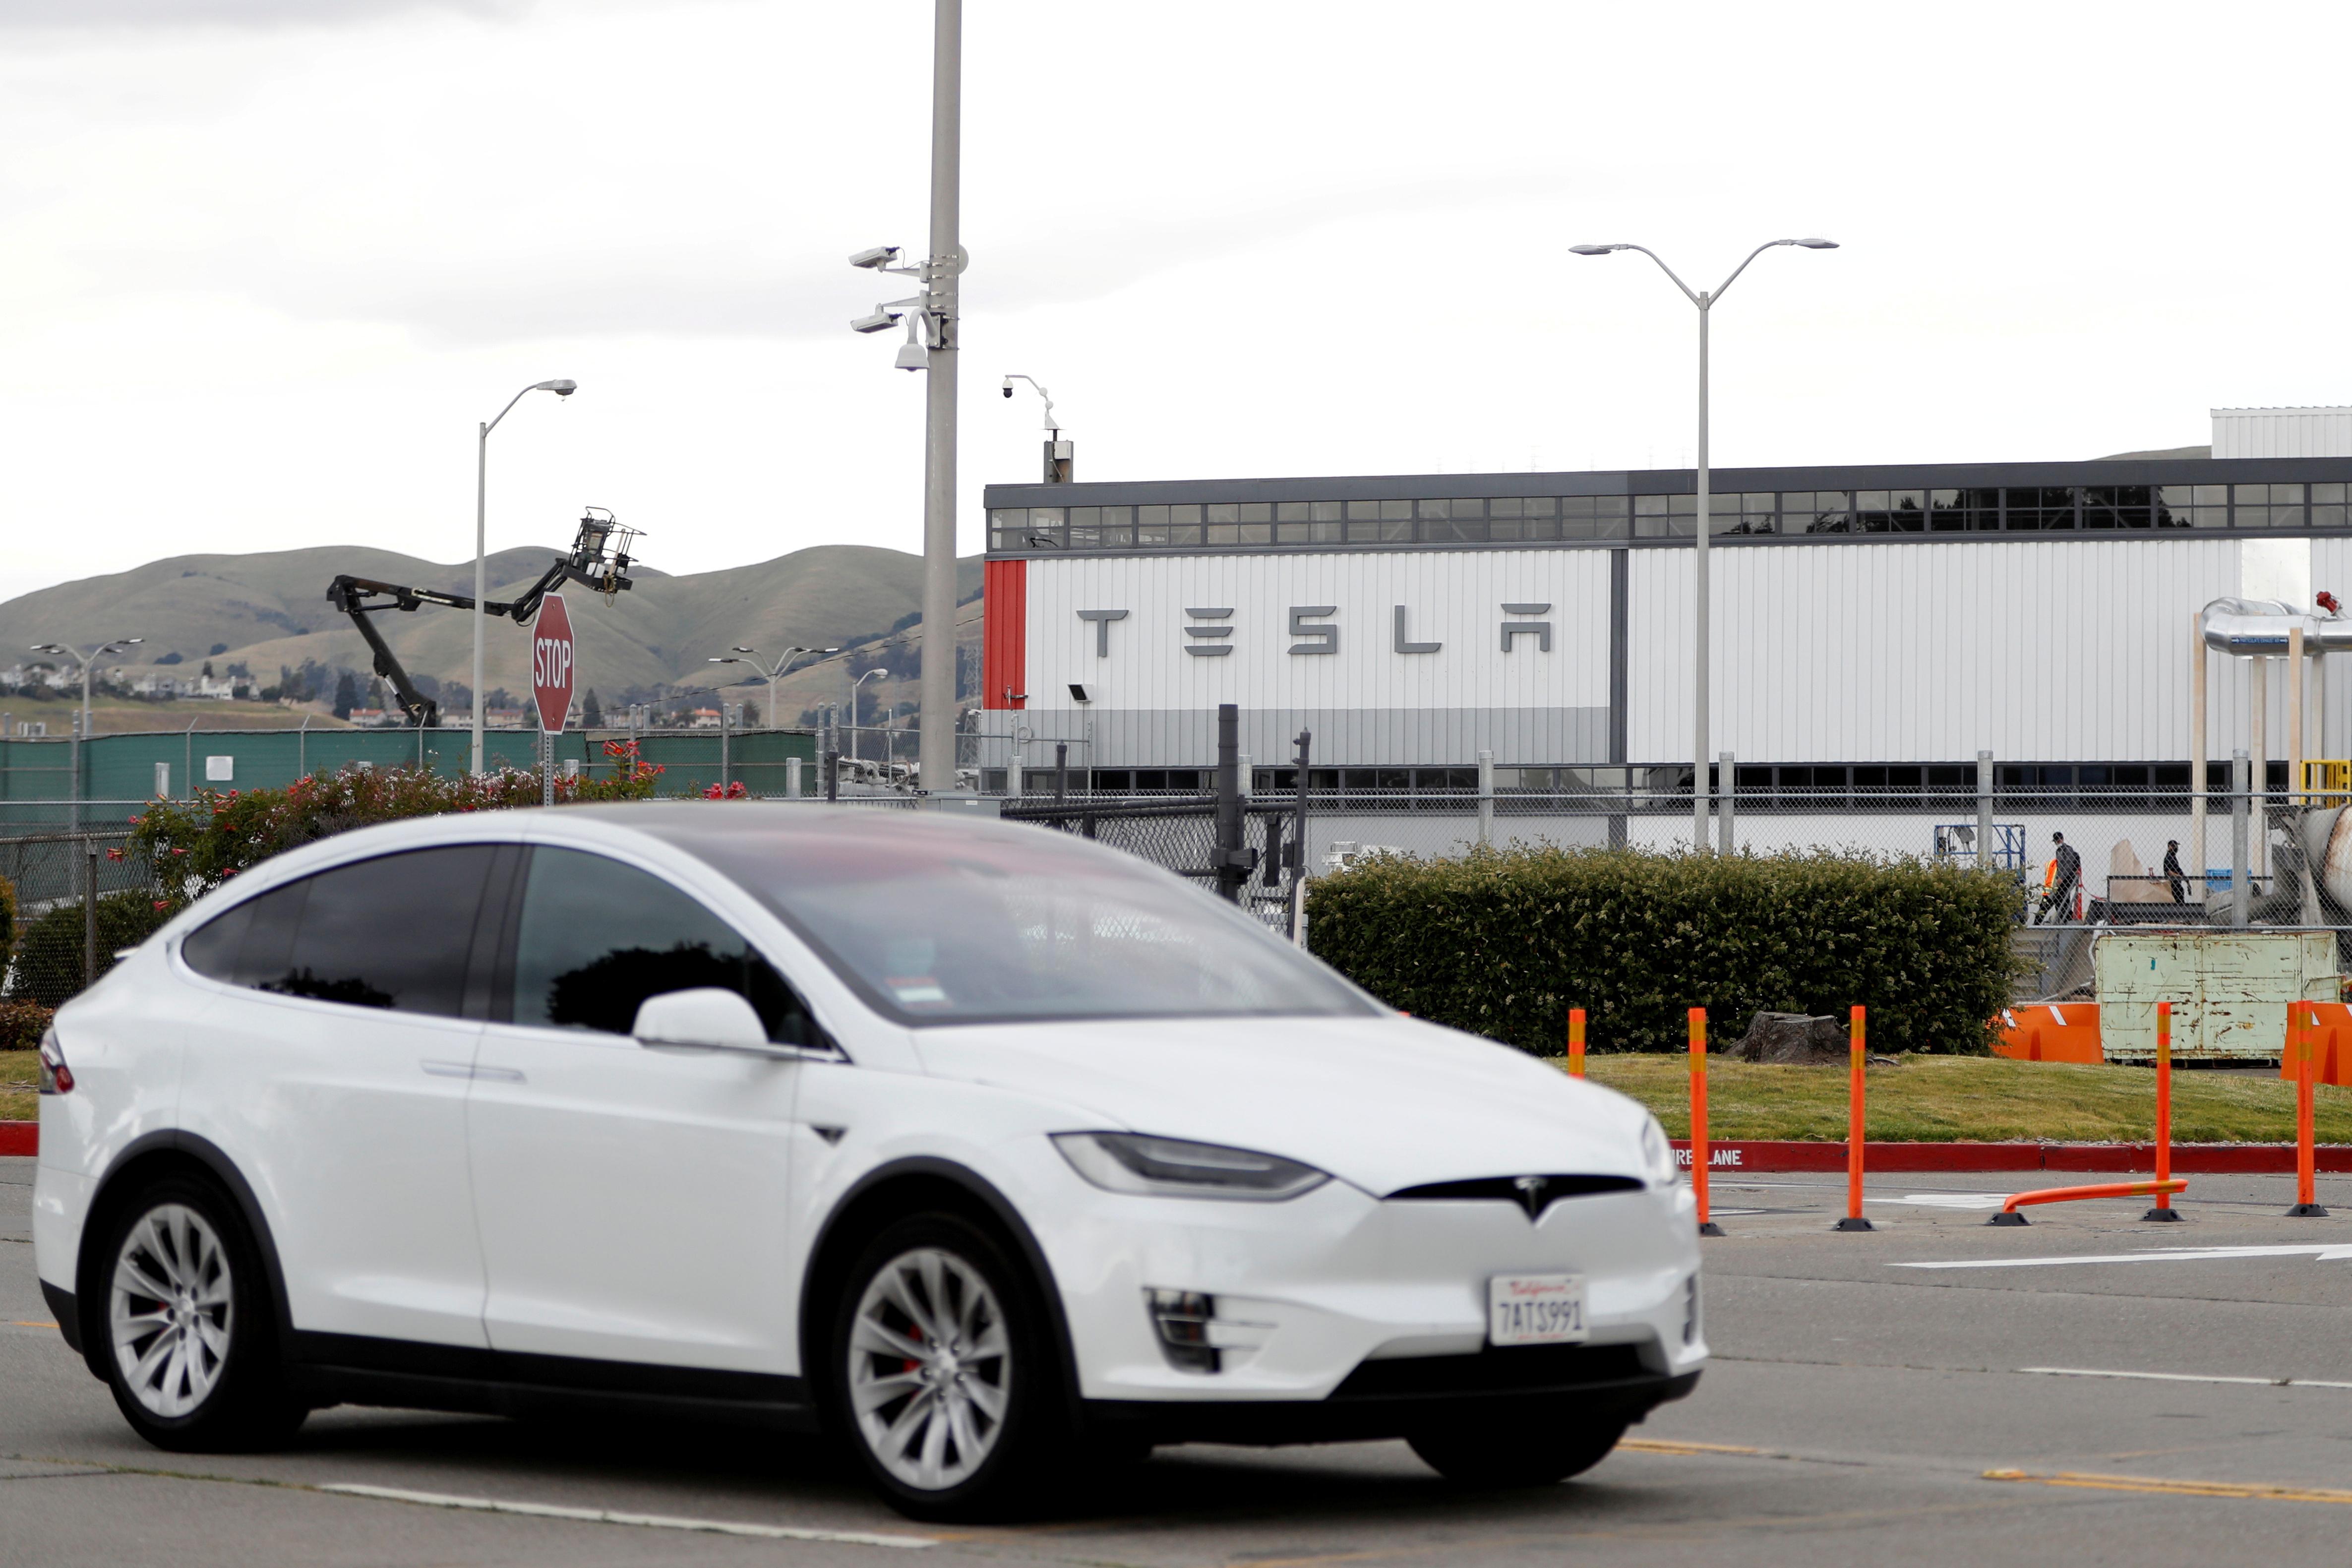 A Tesla vehicle drives past Tesla's primary vehicle factory after CEO Elon Musk announced he was defying local officials' coronavirus disease (COVID-19) restrictions by reopening the plant in Fremont, California, U.S. May 11, 2020. REUTERS/Stephen Lam/File Photo